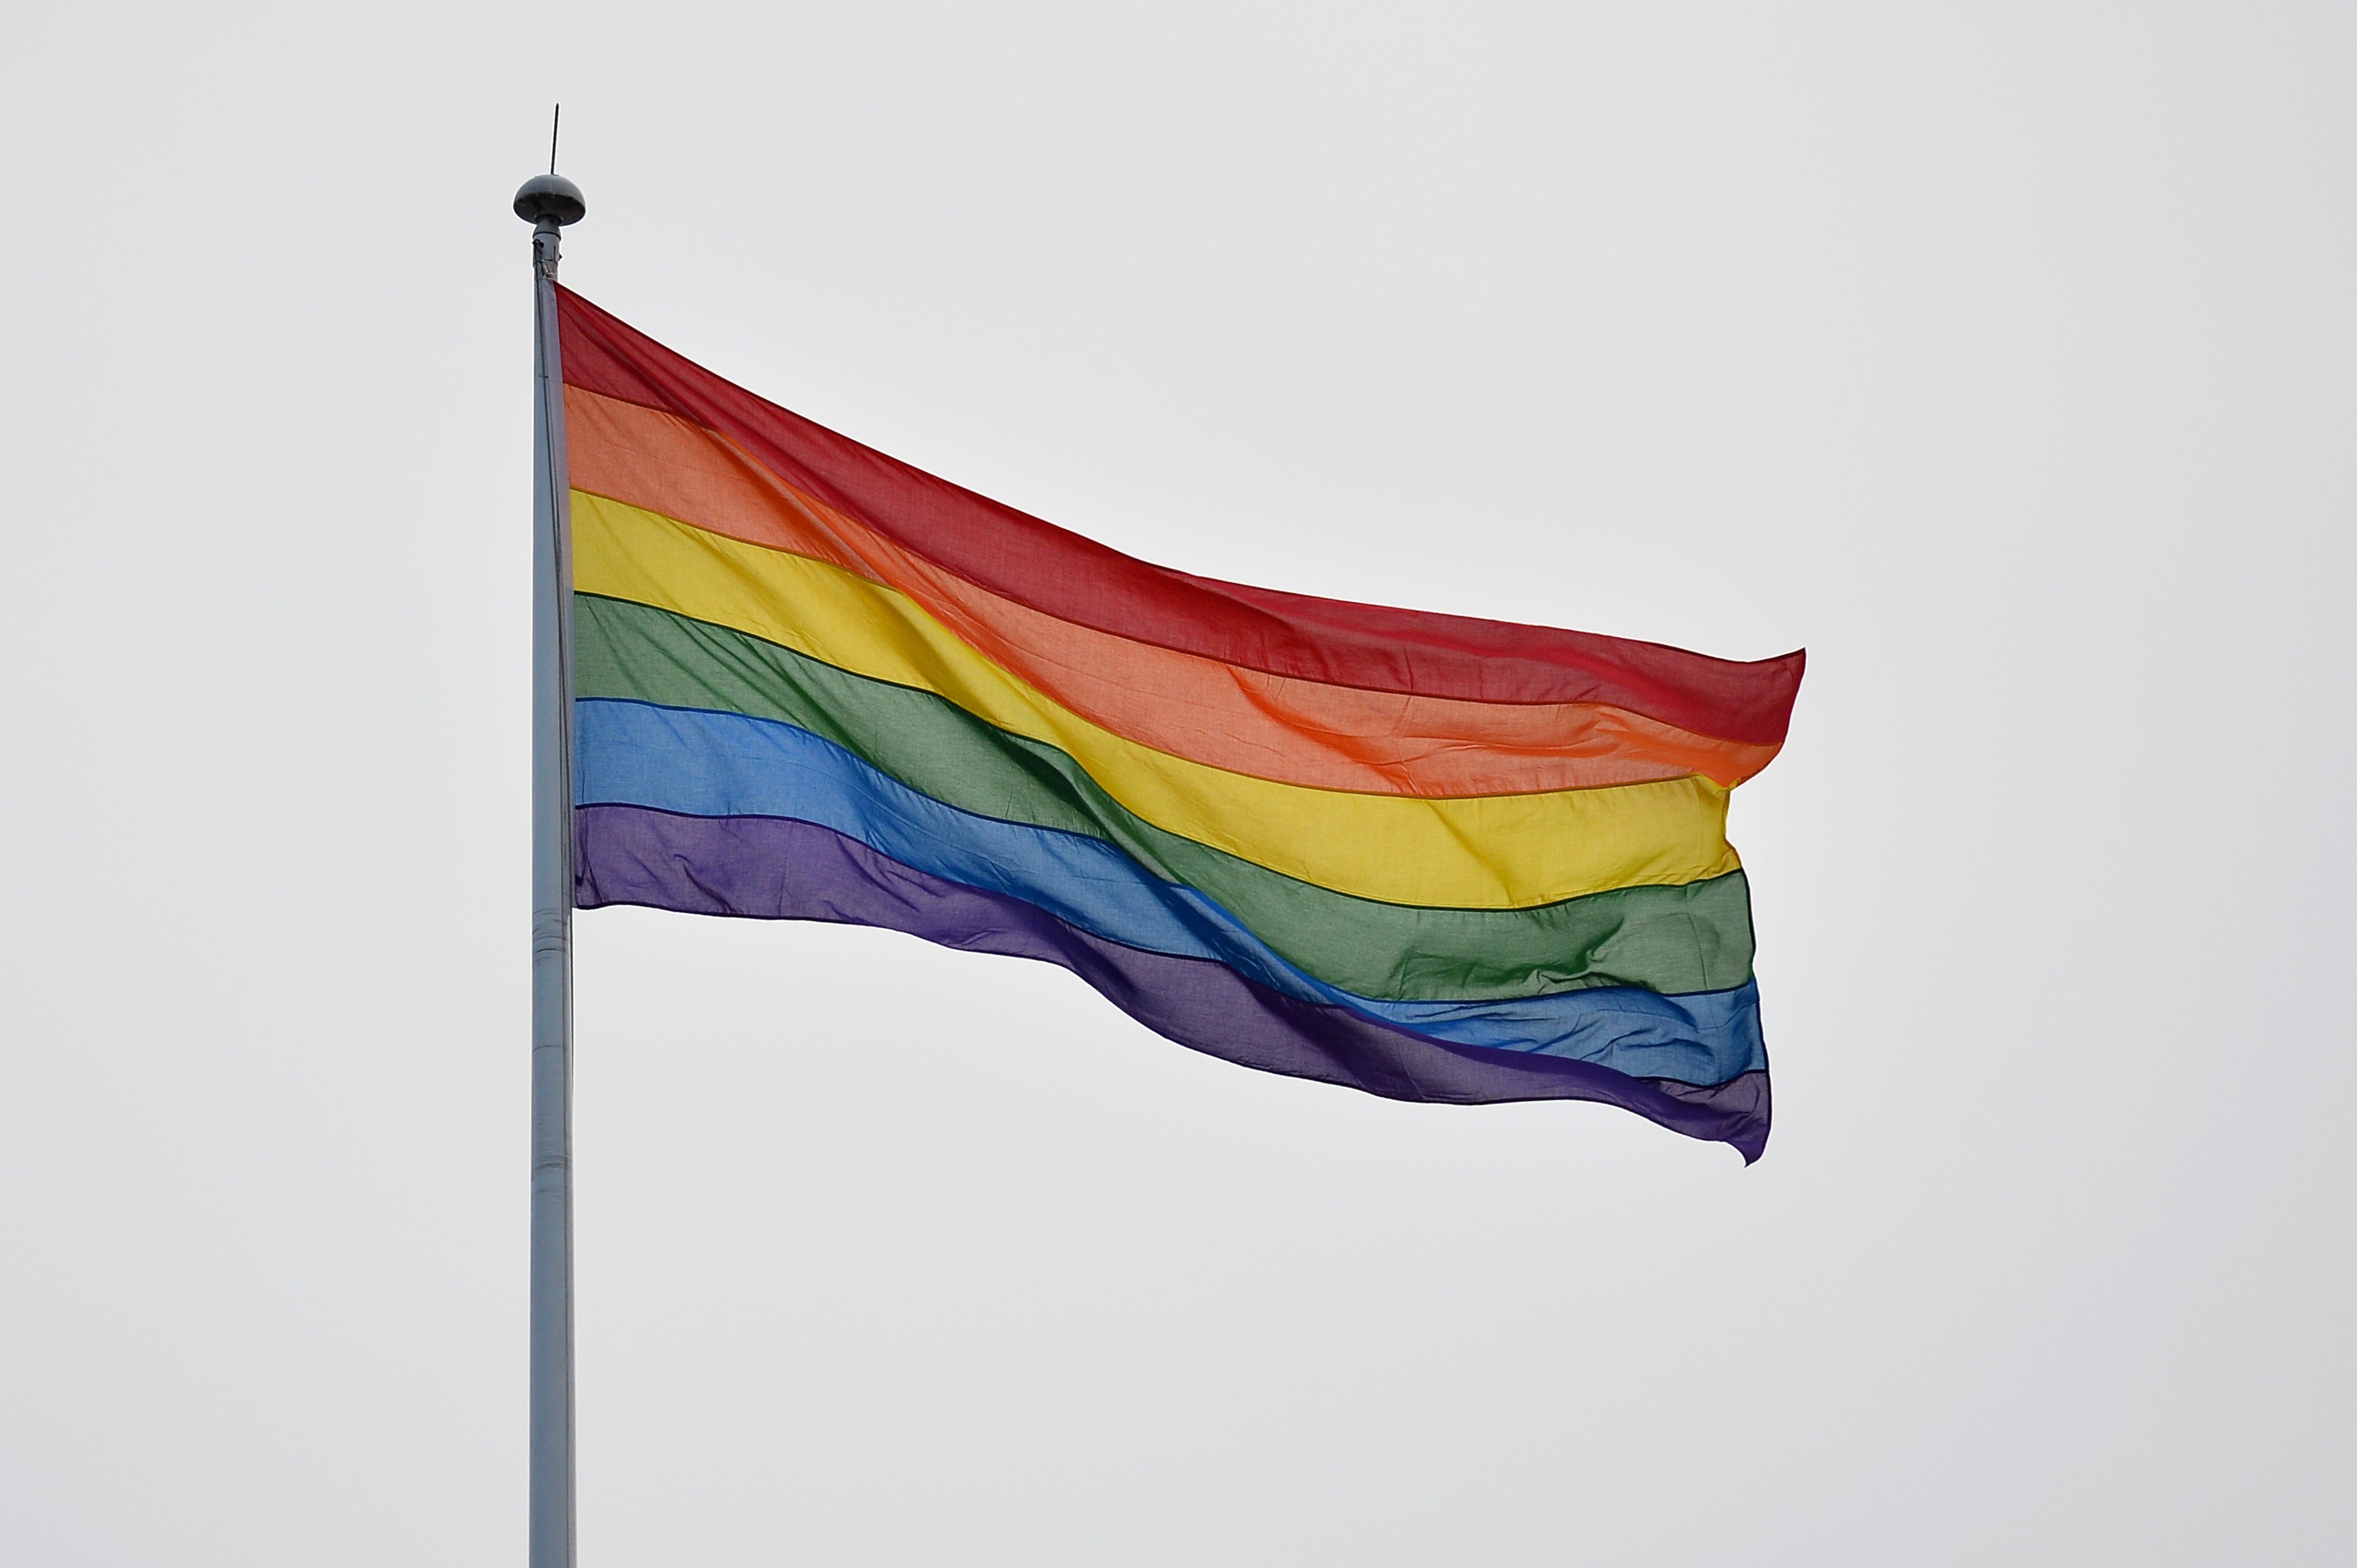 A rainbow gay pride flag flies on Whitehall in central London on Mar. 28, 2014. (Ben Stansall—AFP/Getty Images)